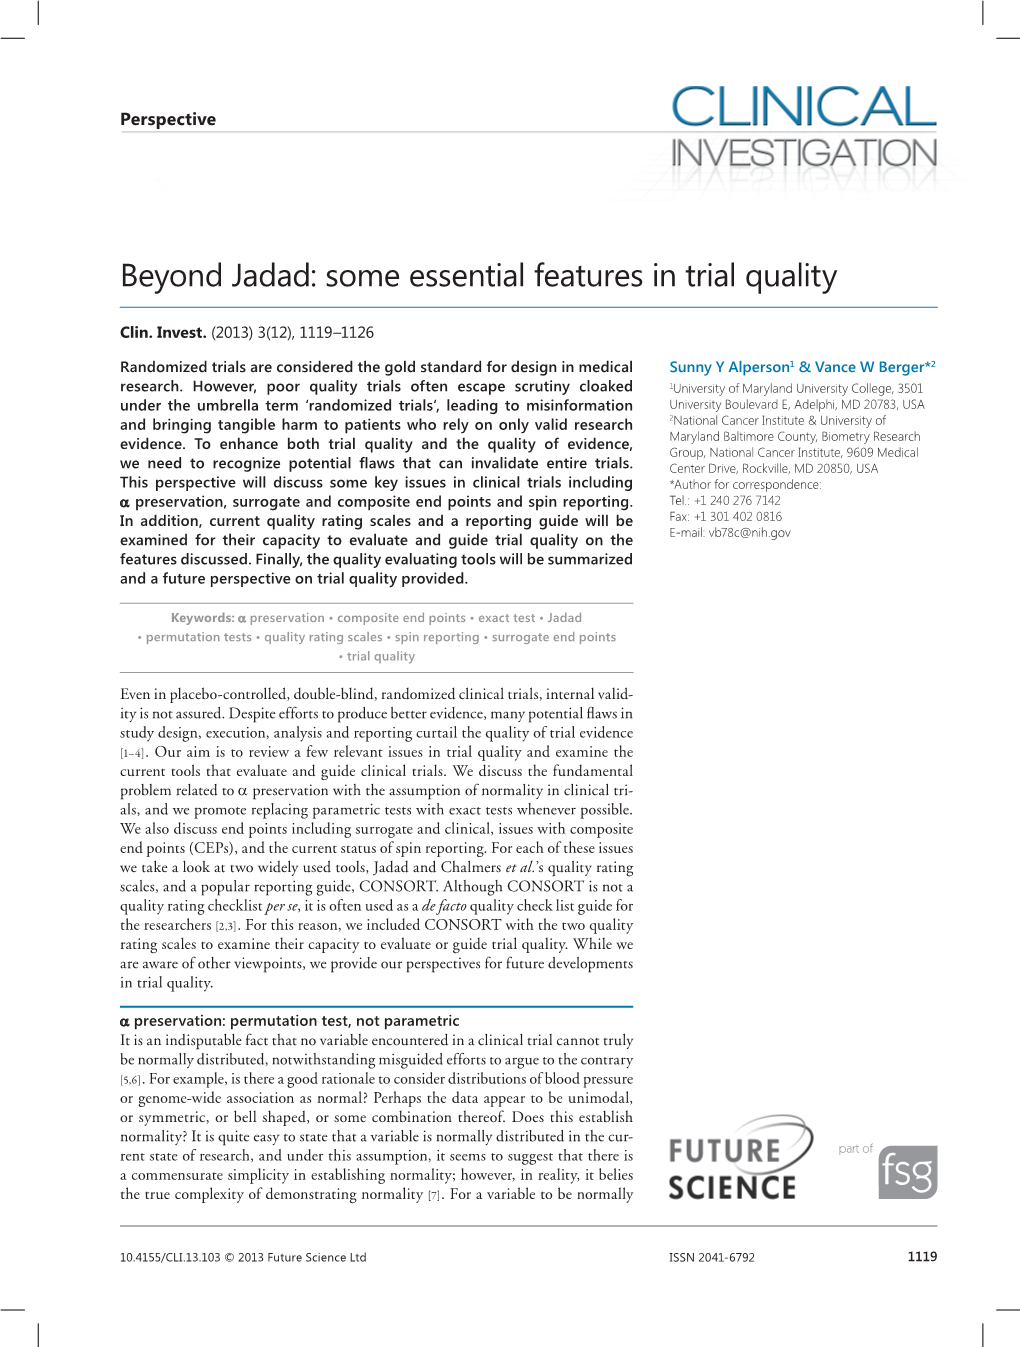 Beyond Jadad: Some Essential Features in Trial Quality